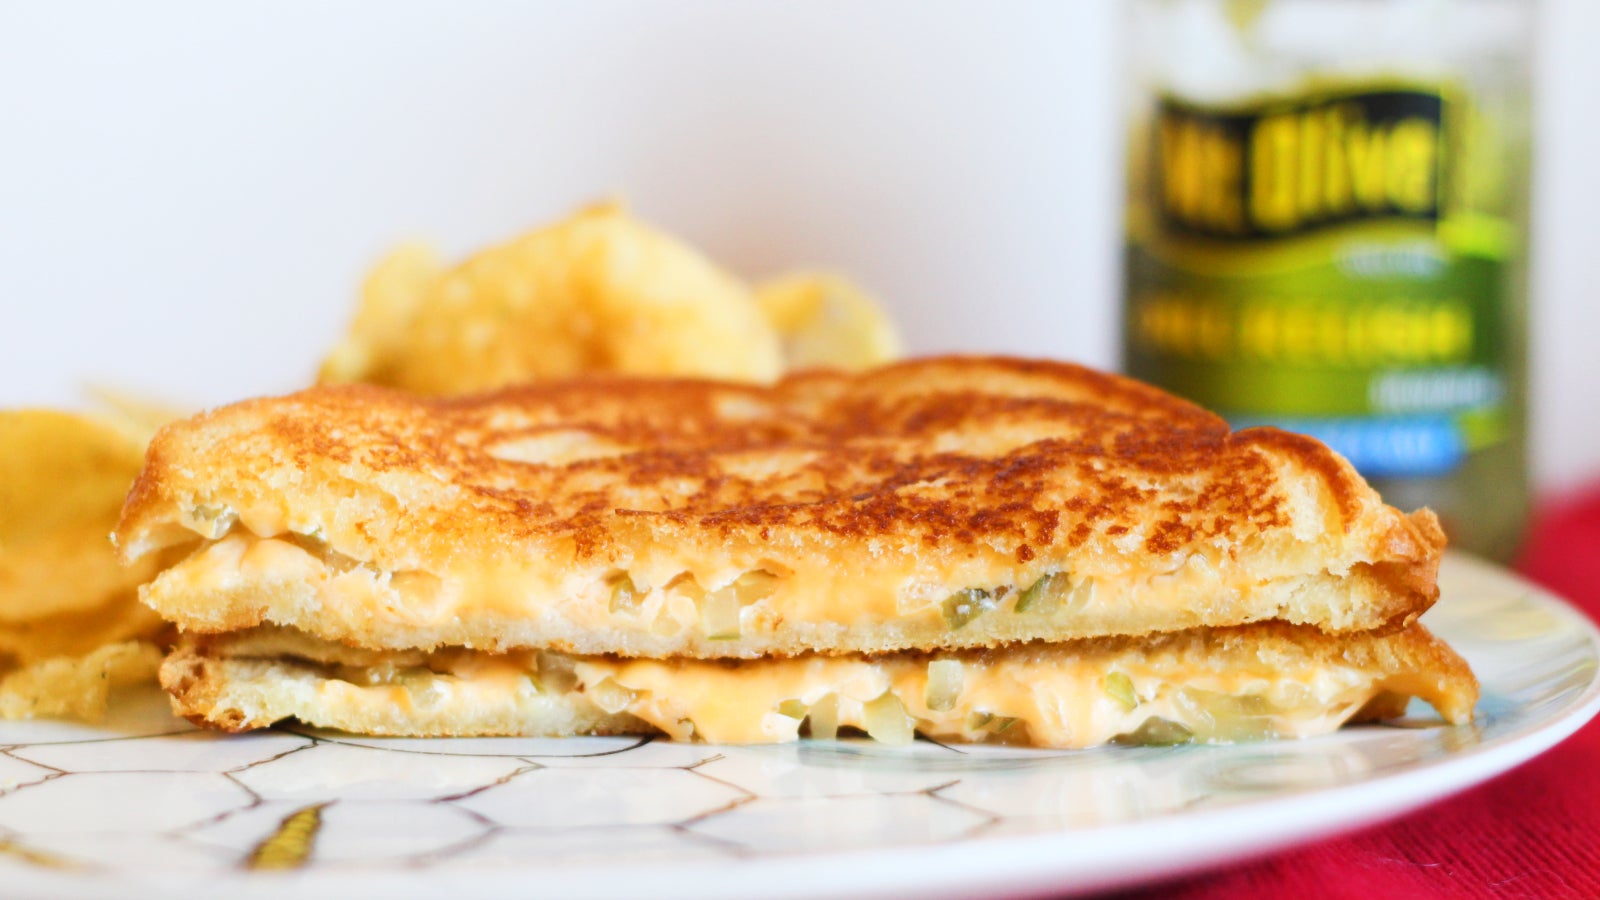 Putting Relish In A Grilled Cheese Is A Very Good Idea